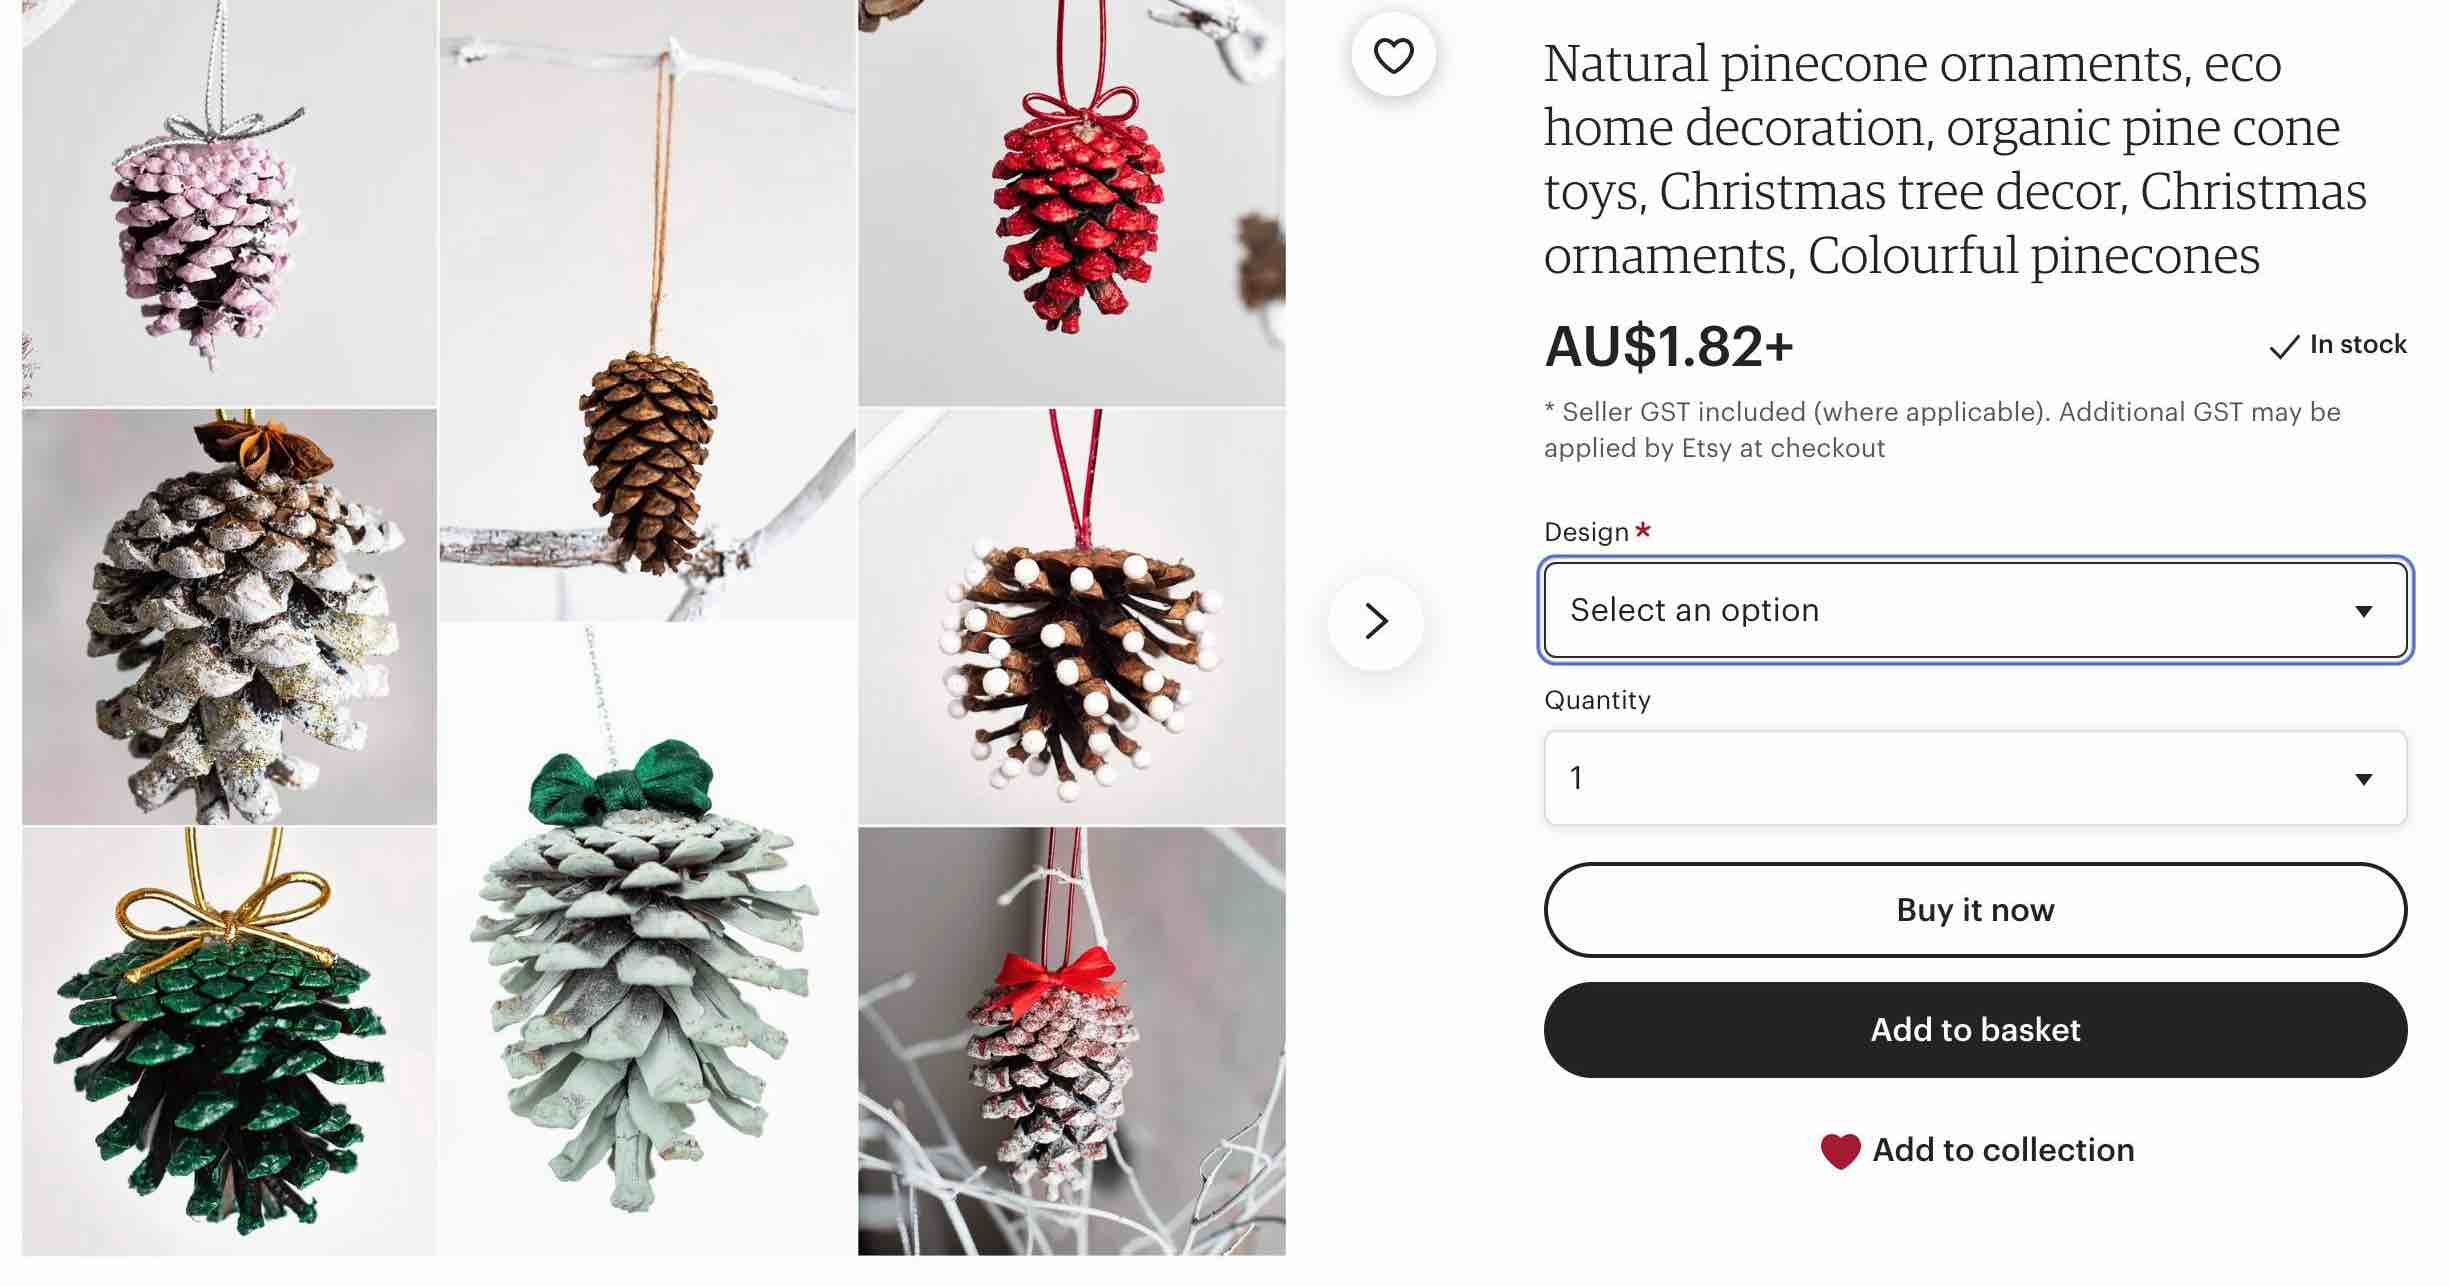 PINECONE ORNAMENT TO SELL